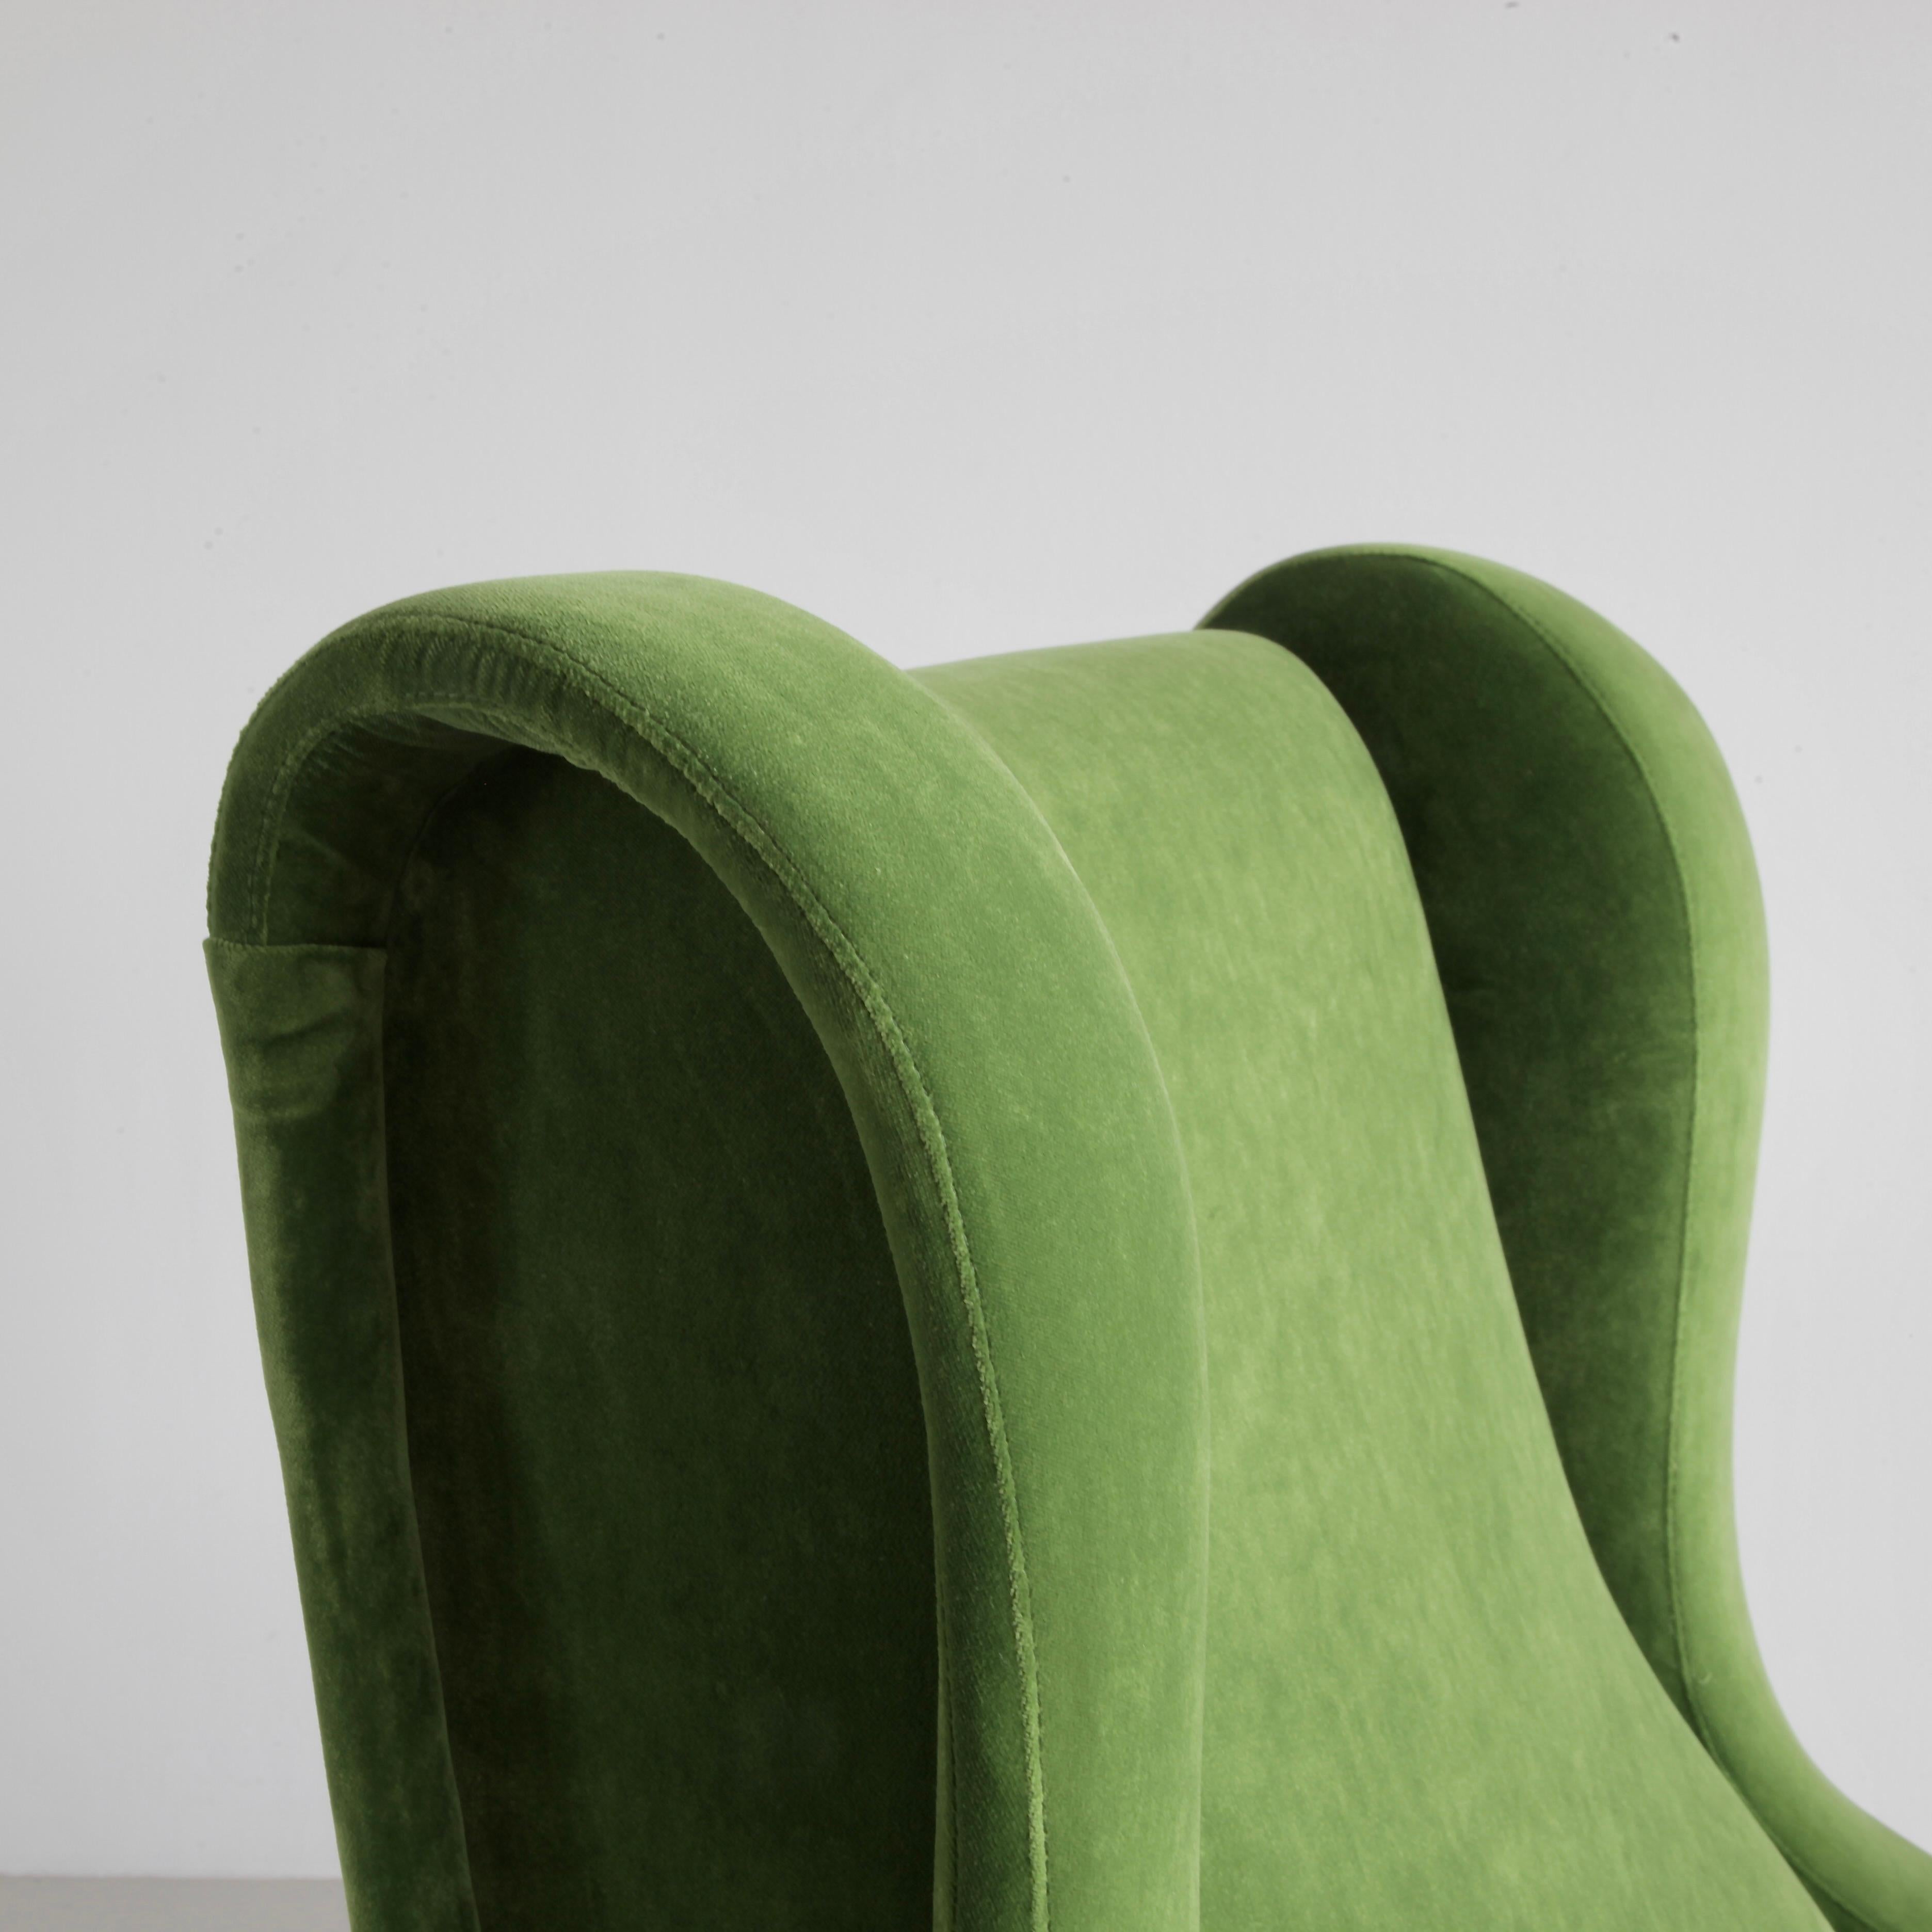 An early original pair of the 'Senior' lounge chair, upholstered in new green English velvet. Metal frame with brass leg fittings and wooden construction.

Literature: Repertorio del Design Italiano 1950-2000, p. 25, illustrated.

Marco Zanuso